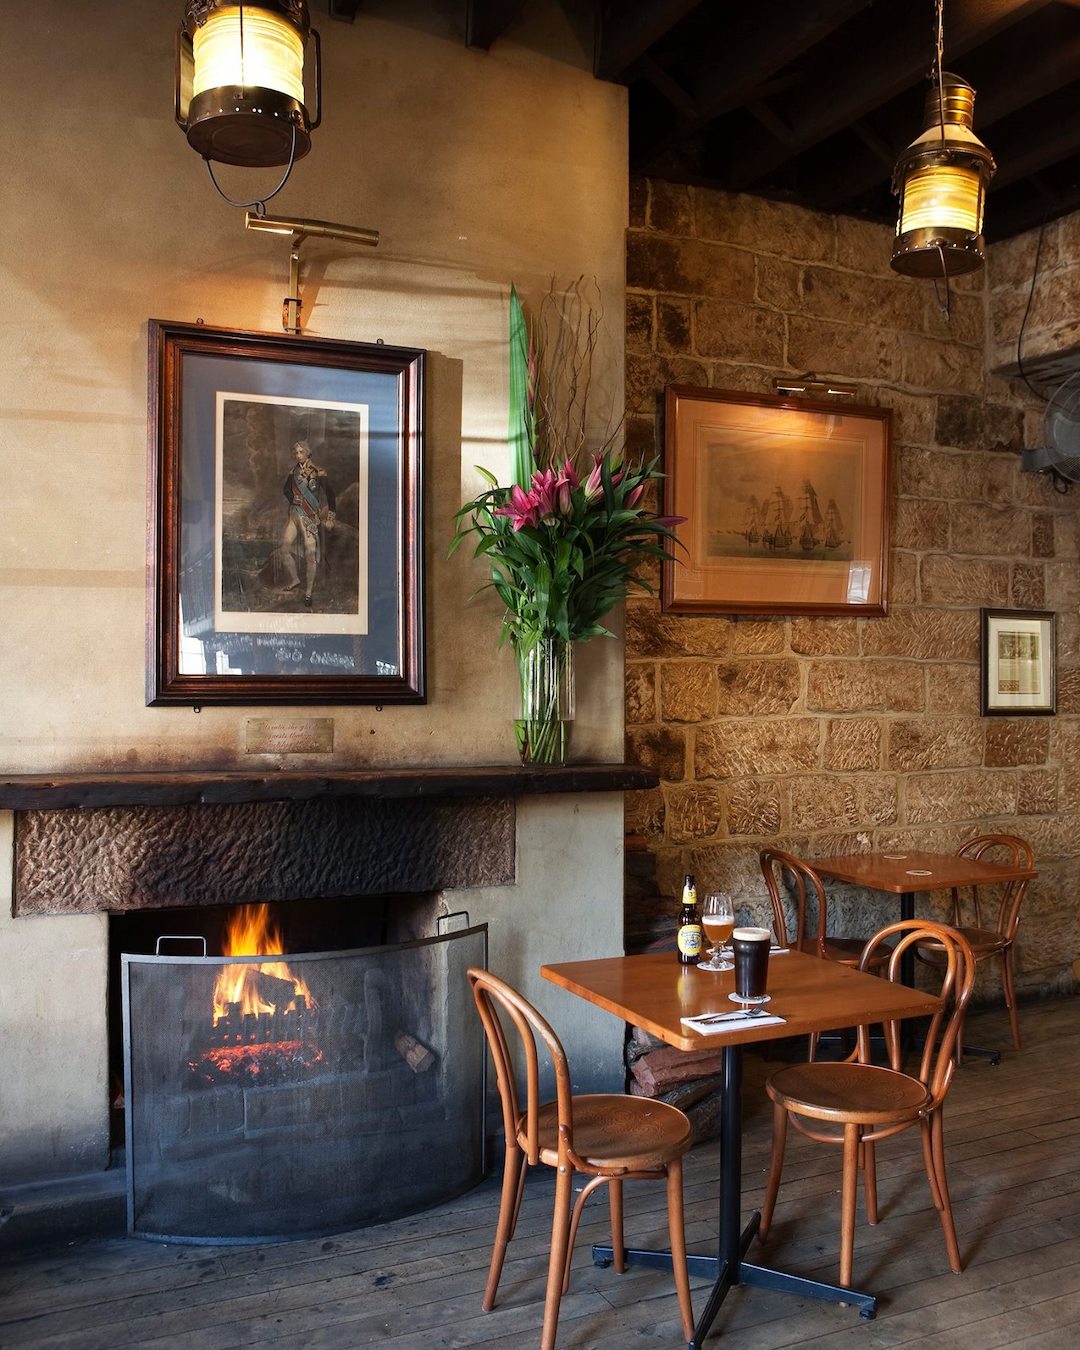 The Lord Nelson Brewery Hotel Fireplace Pubs